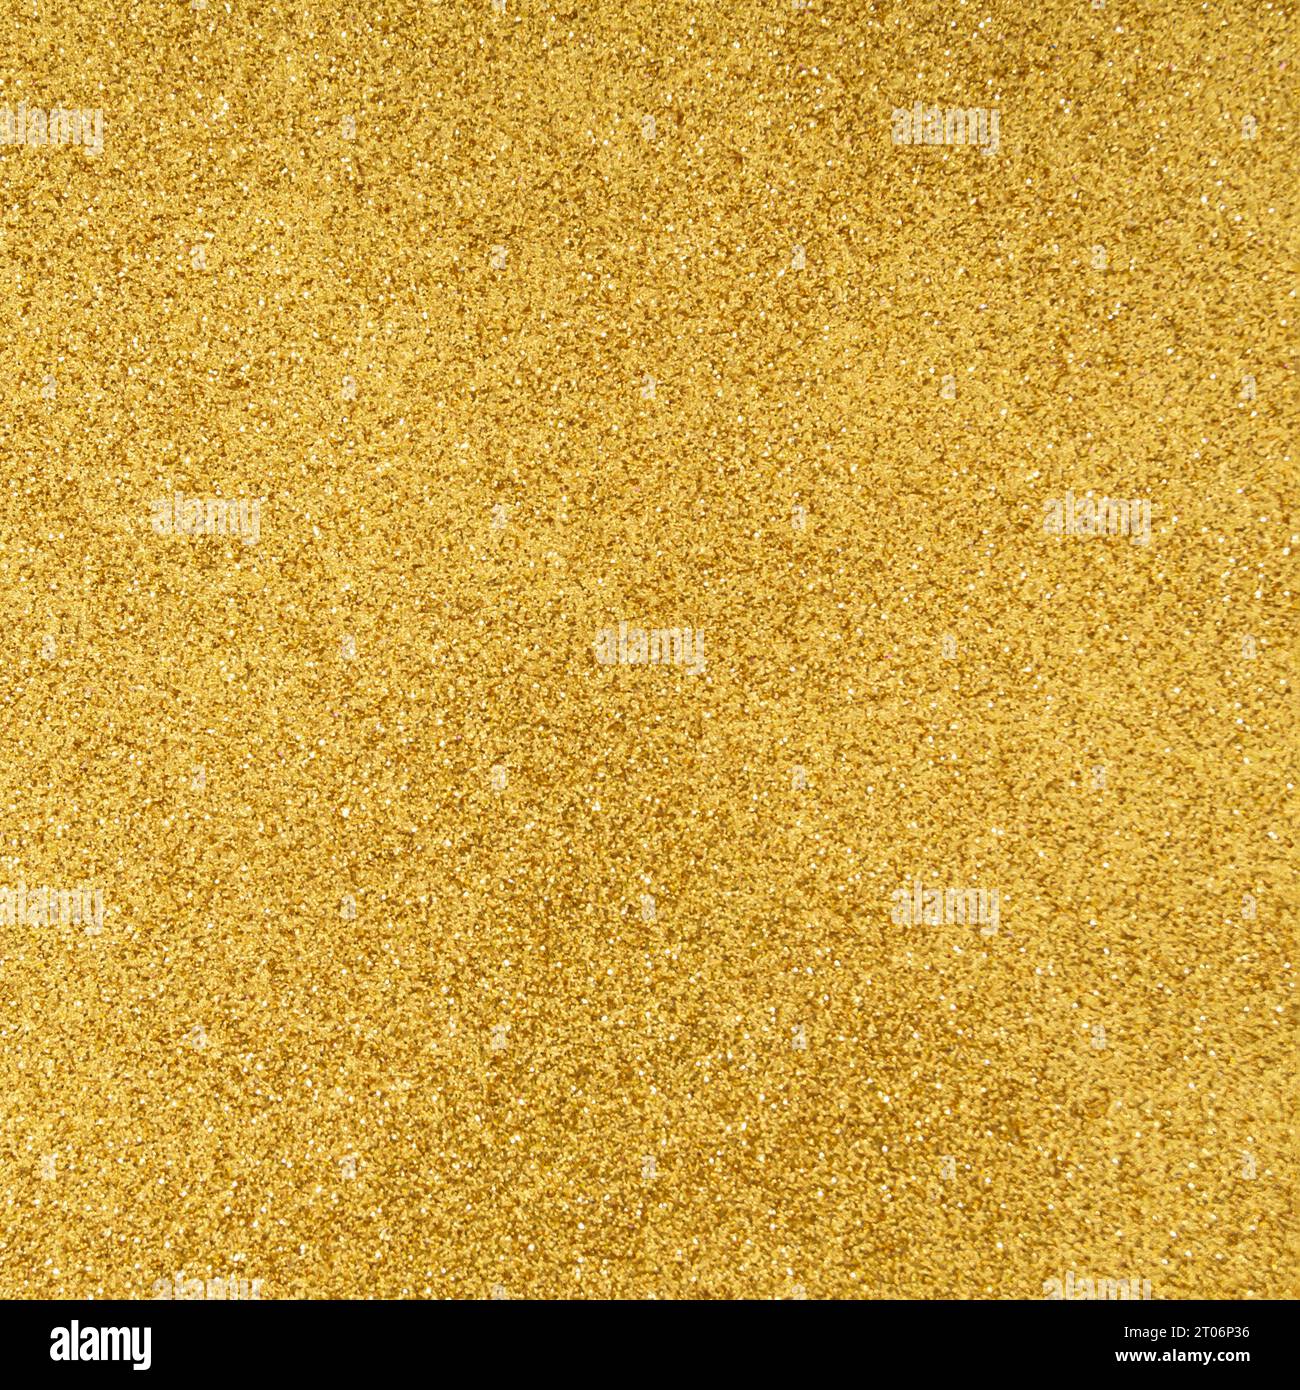 Trendy sparkly golden glitter texture background. Minimal background concept. Creative texture background idea. Flat lay, top of view. Stock Photo